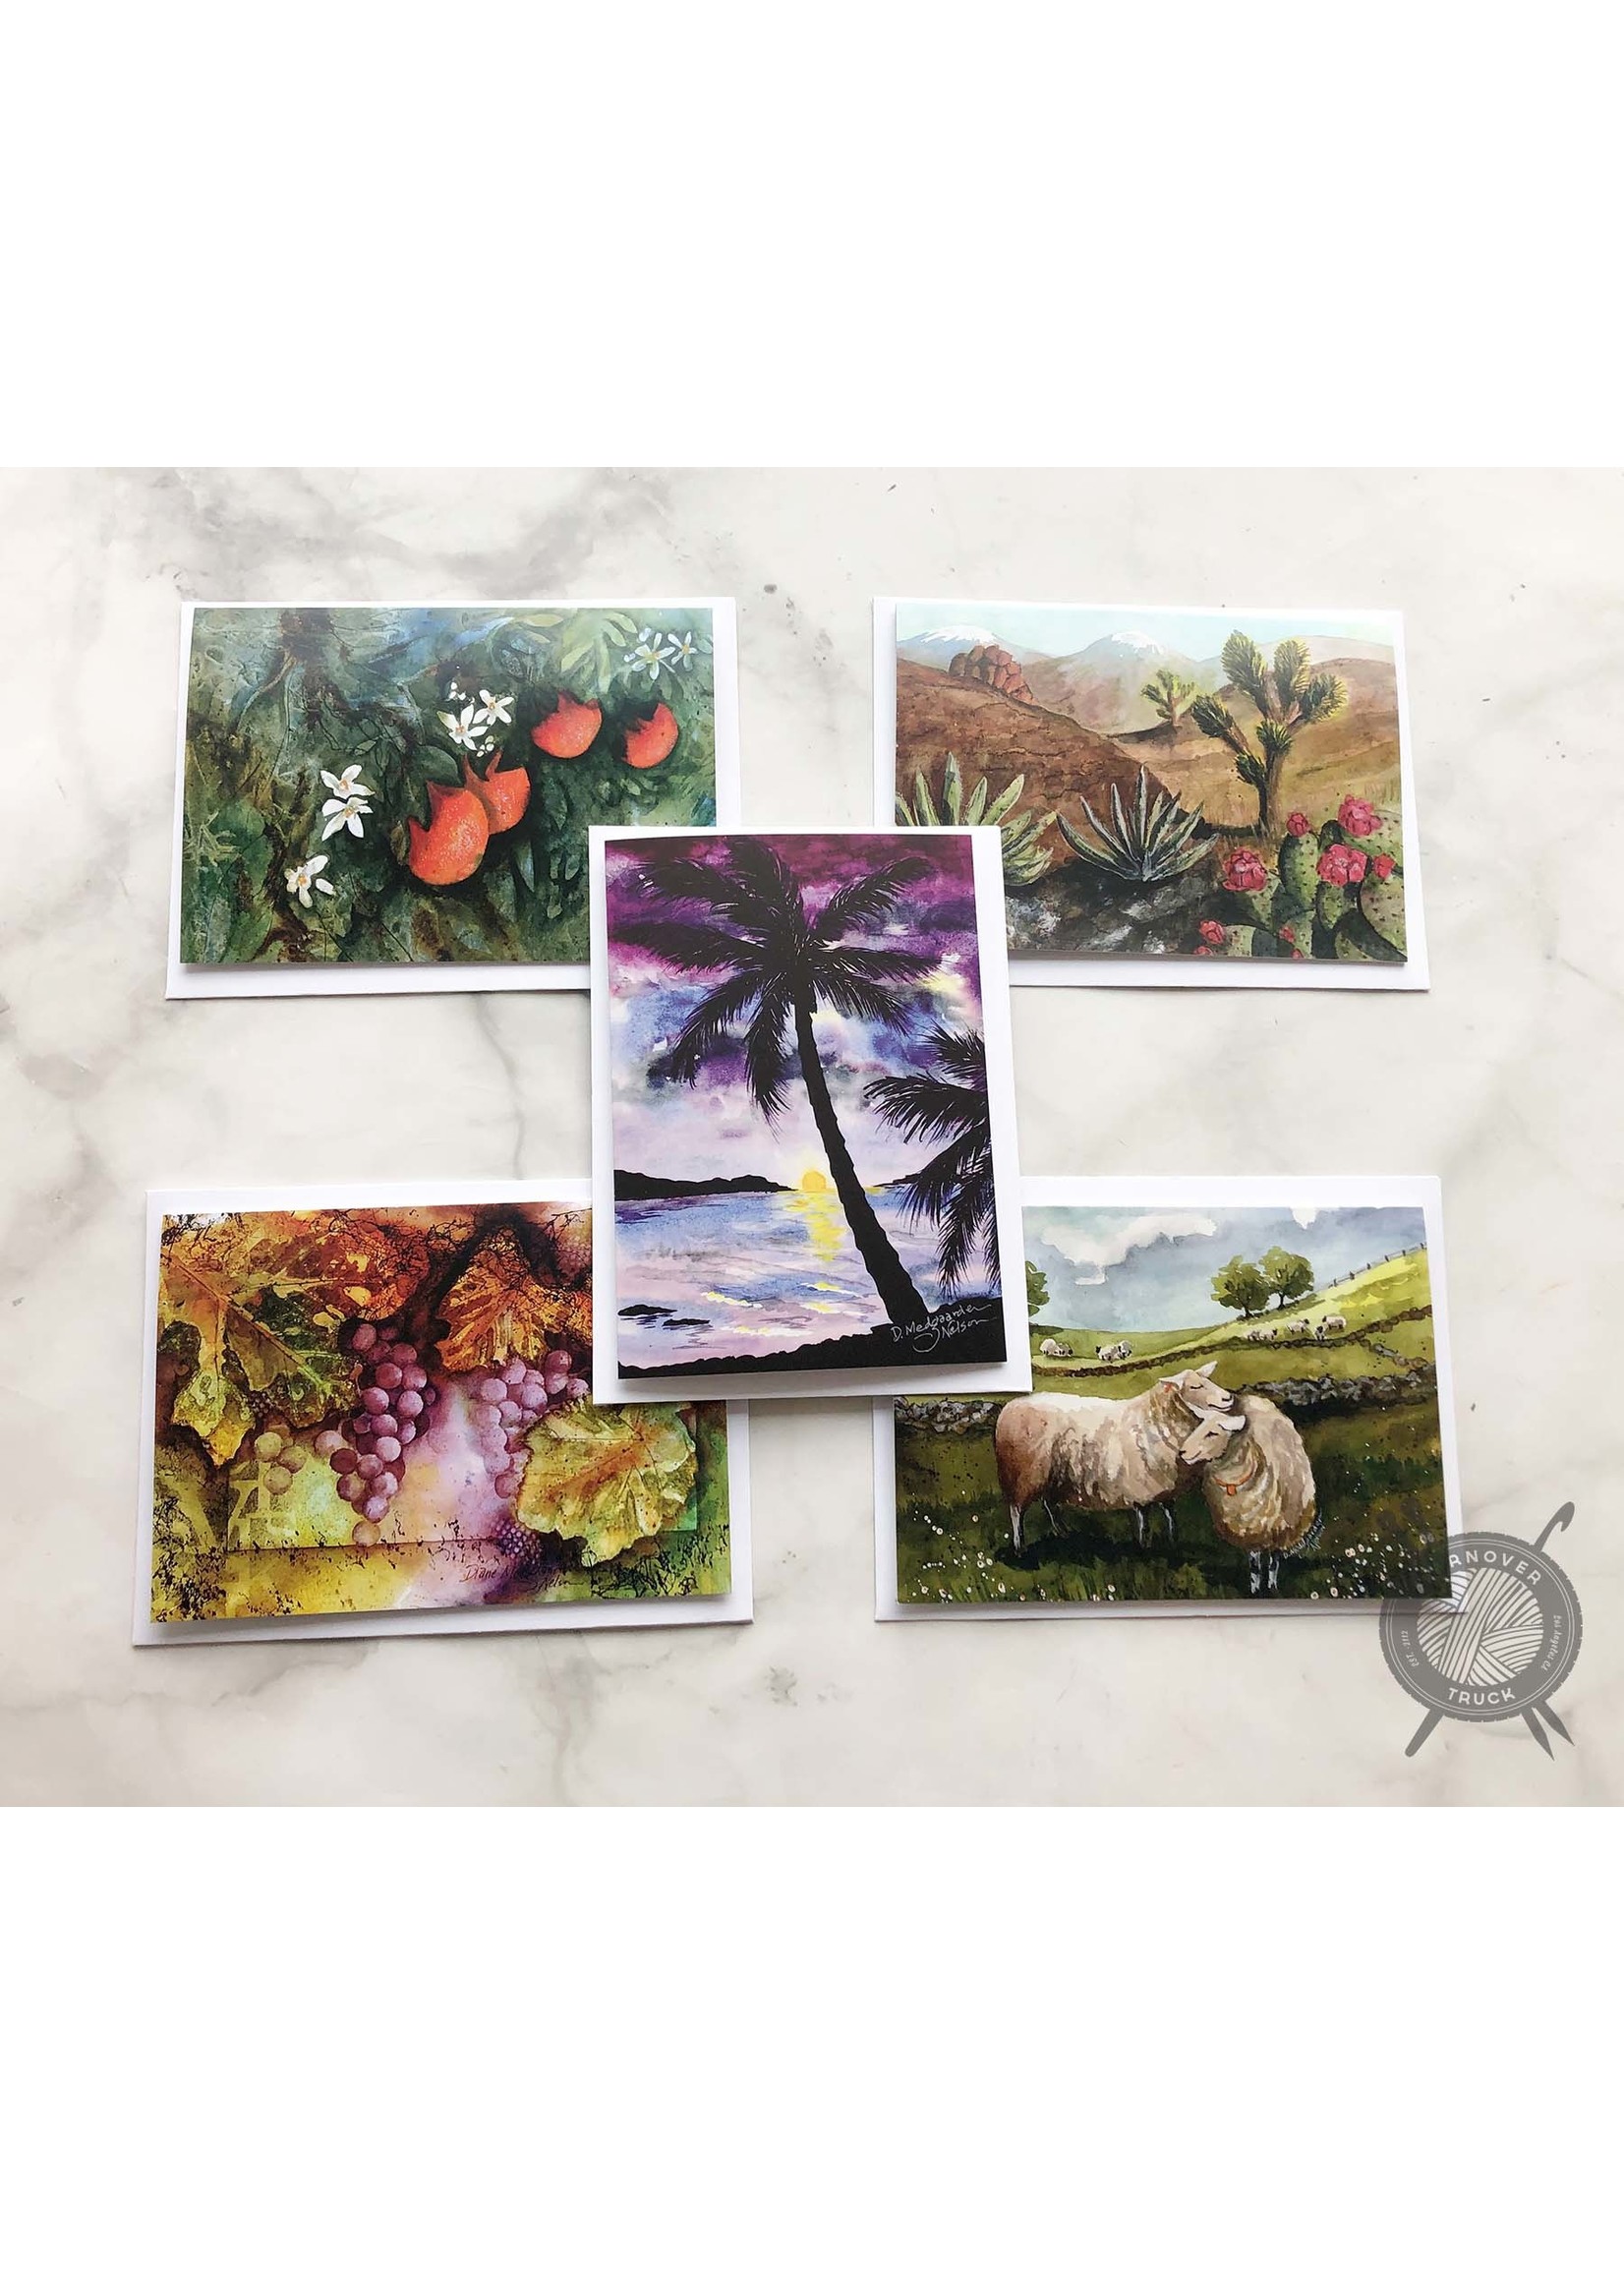 Yarnover Truck Sample Pack of Watercolor Note Cards by Diane Medgaarden Nelson